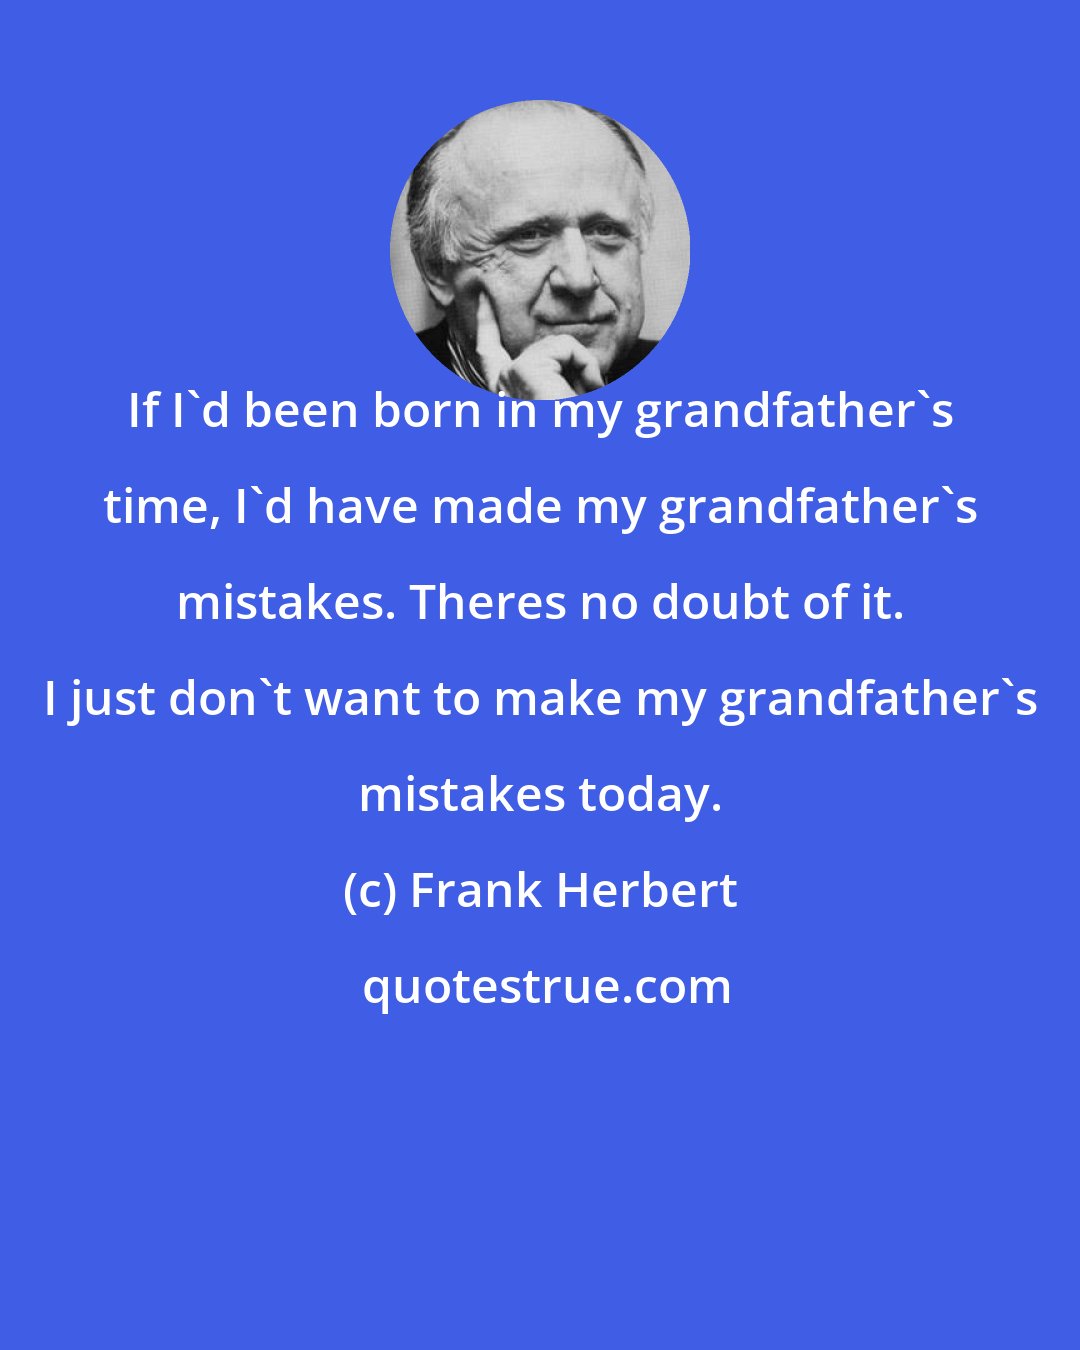 Frank Herbert: If I'd been born in my grandfather's time, I'd have made my grandfather's mistakes. Theres no doubt of it. I just don't want to make my grandfather's mistakes today.